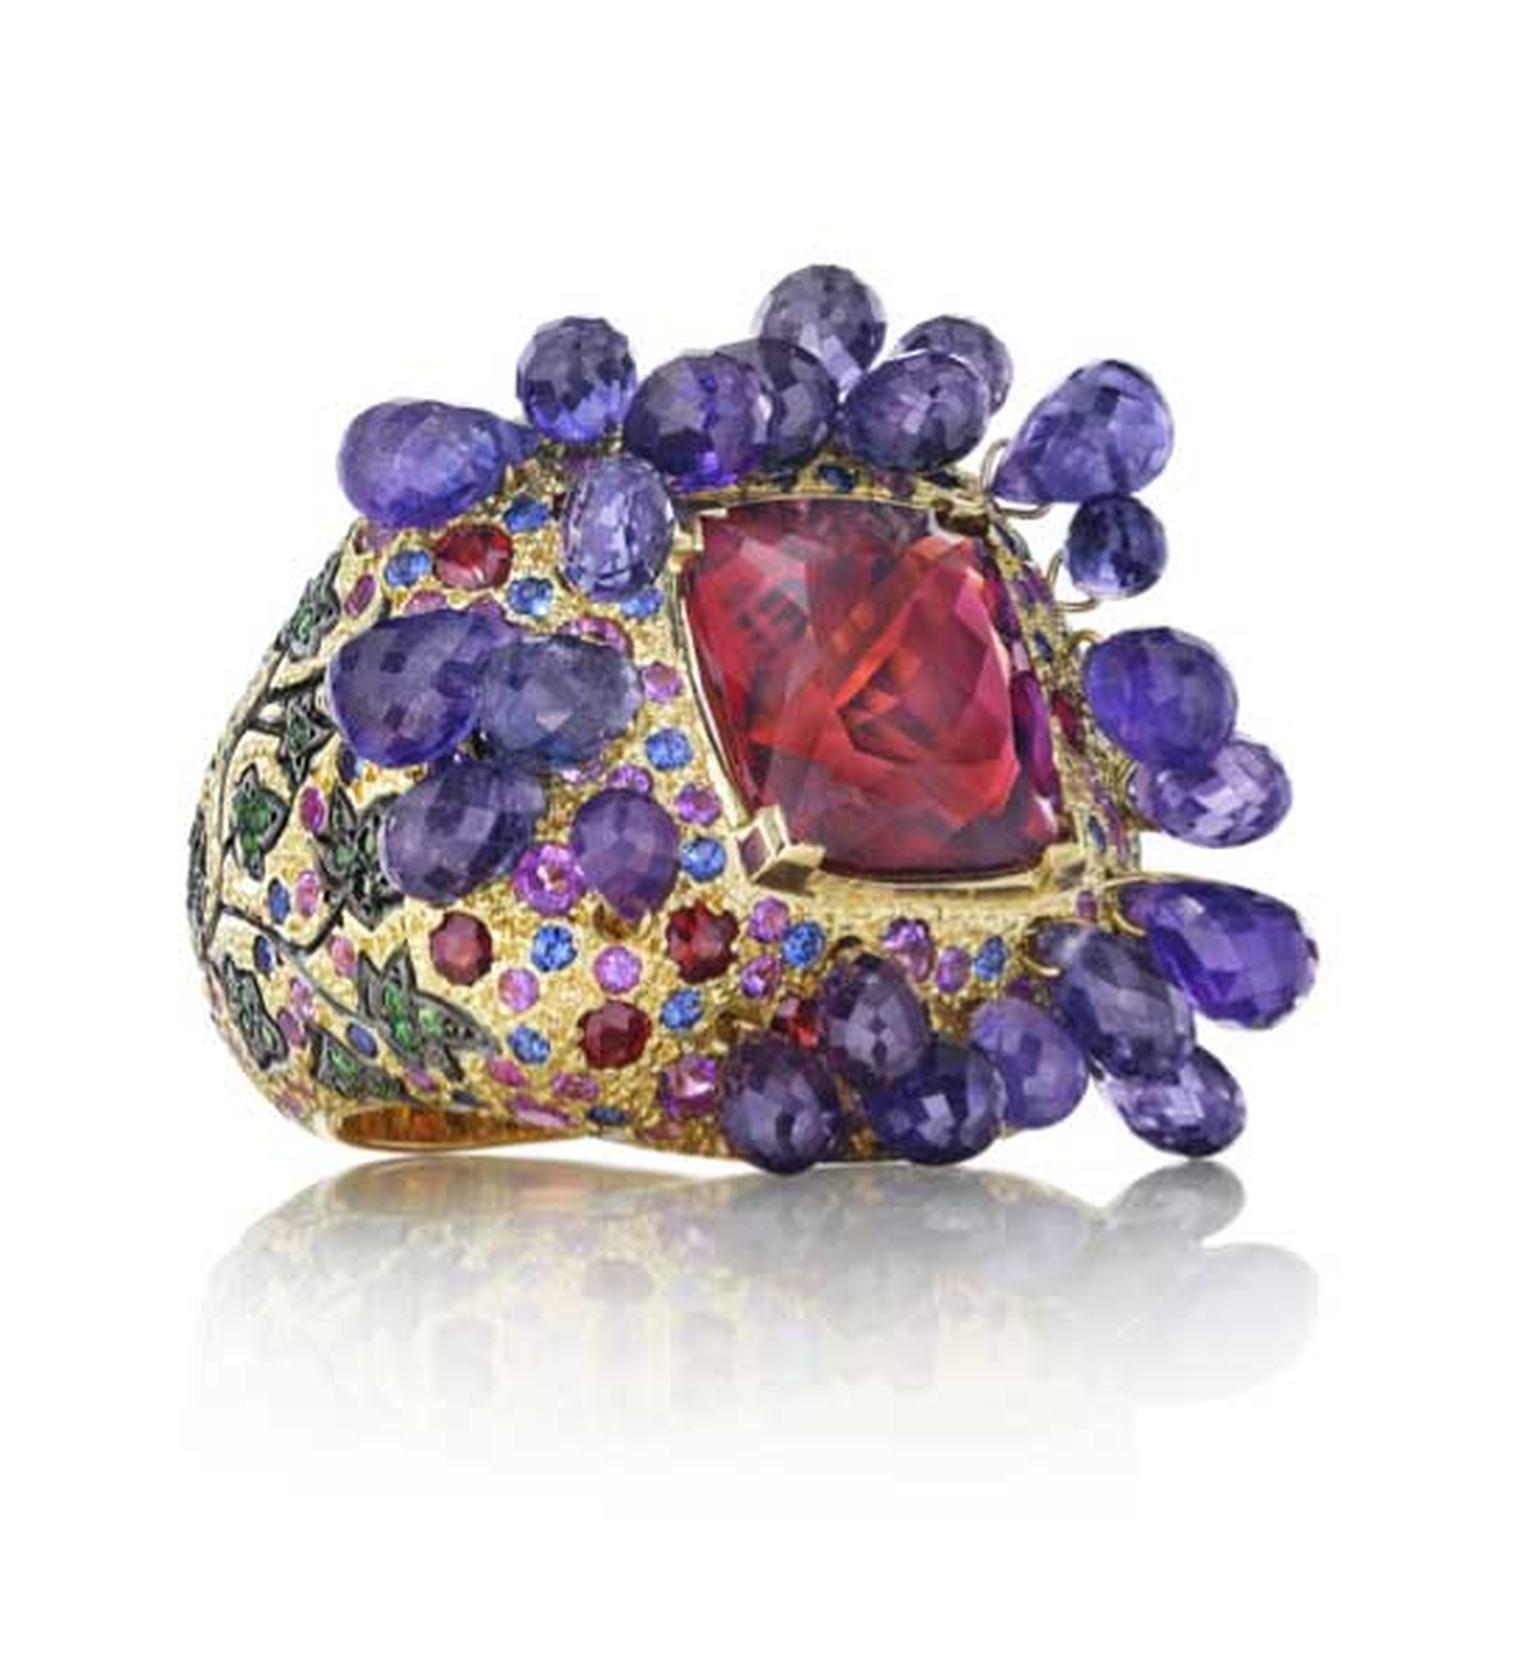 One-of-a-kind Madstone Bacchus ring with amethyst briolettes, a palette of coloured gemstones and a shank of creeping ivy.